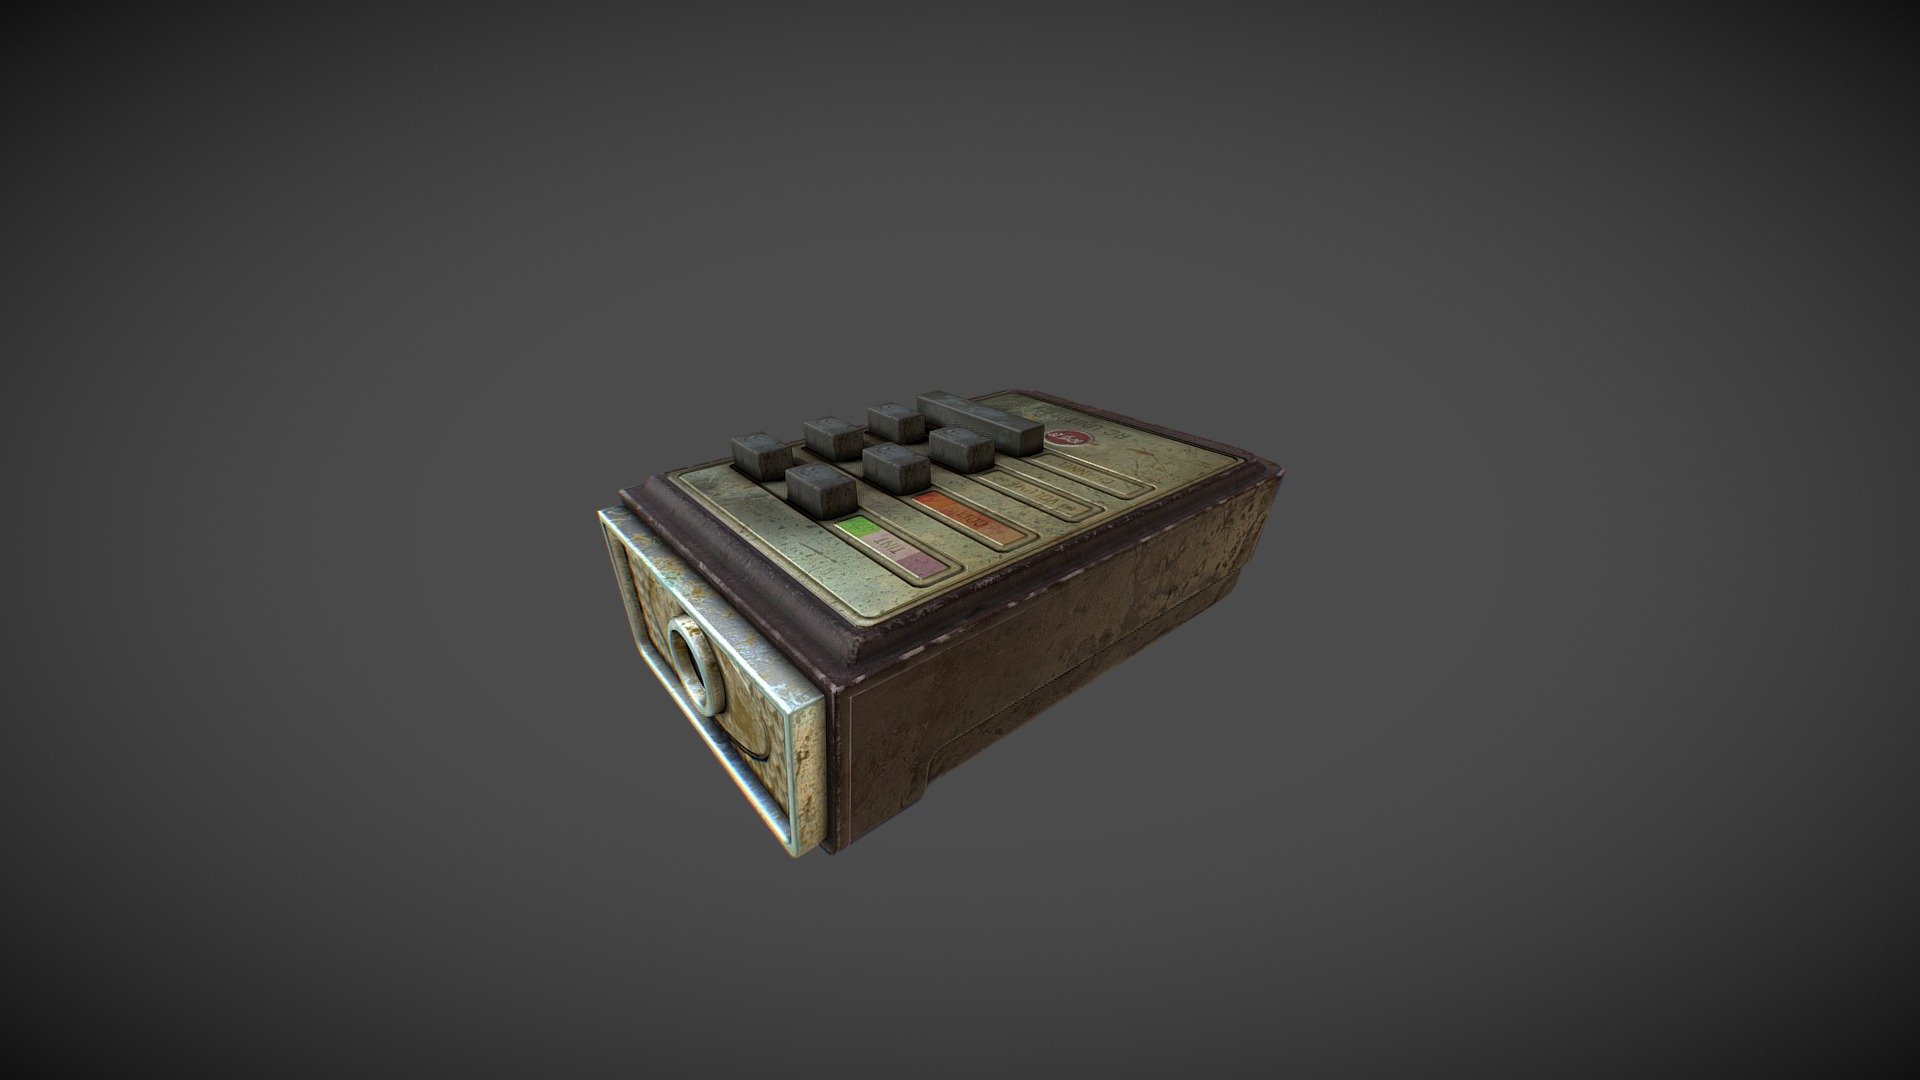 Lowpoly model was made in C4D R17! It has one 2k map (2048x2048) version including ( Albedo, Base color, Specular , Glossiness, Metallic, Normal, Roughness, Occlusion, MaskMap ) in png format. Object is centered . It has detailed texture map and could also be used for some medium close-up shots,scenes ,renders and games. Textures are in zip file.

There are two types of objects, one as a whole and one with separate buttons.

Object has 2 LOD stages in fbx format

LOD0: 1018 tris

LOD1: 402 tris - Old Remote controller - Buy Royalty Free 3D model by Salex 3d model